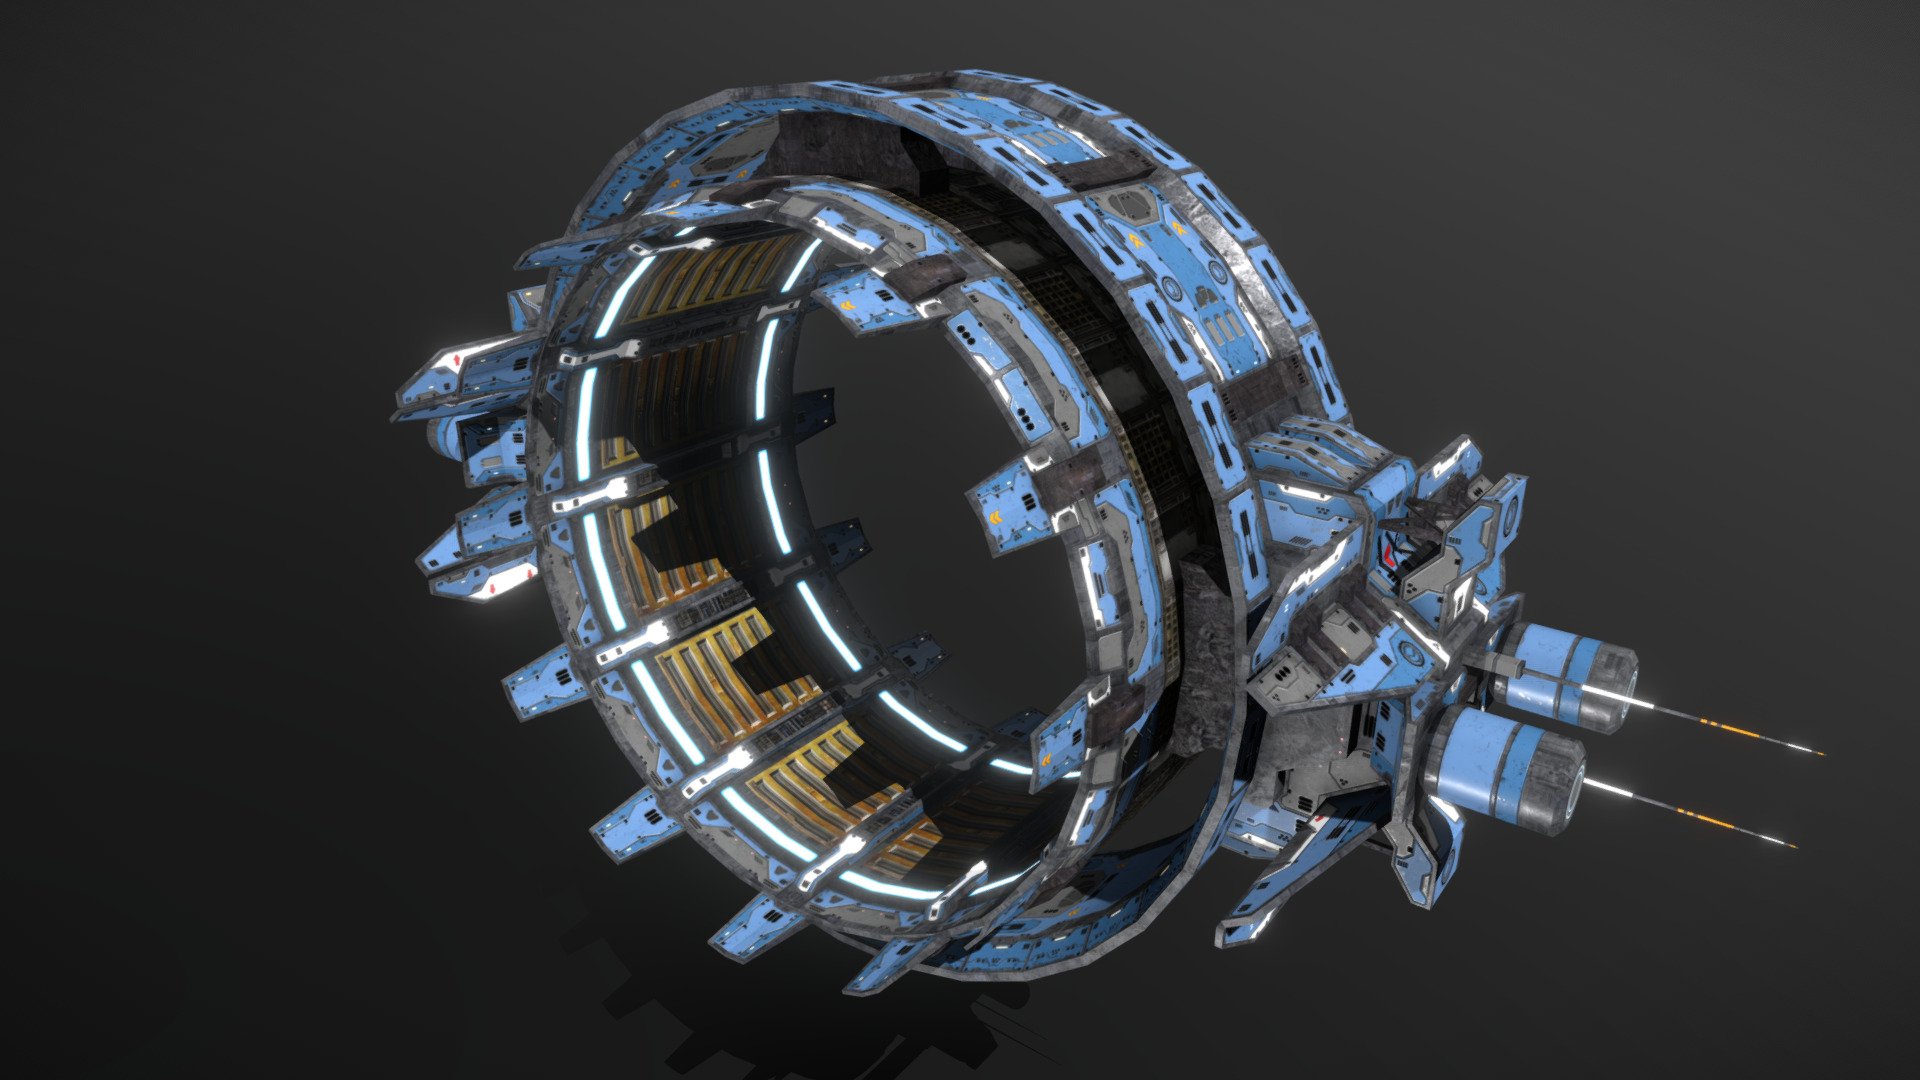 This is a model of a low-poly and game-ready scifi jumpgate. 

The weapons are separate meshes and can be animated with a keyframe animation tool. The weapon loadout can be changed as well.

The model comes with several differently colored texture sets. The PSD file with intact layers is included too.

Please note: The textures in the Sketchfab viewer have a reduced resolution to improve Sketchfab loading speed.

If you have purchased this model please make sure to download the “additional file”.  It contains FBX and OBJ meshes, full resolution textures and the source PSDs with intact layers. The meshes are separate and can be animated (e.g. firing animations for gun barrels, rotating turrets, etc) 3d model